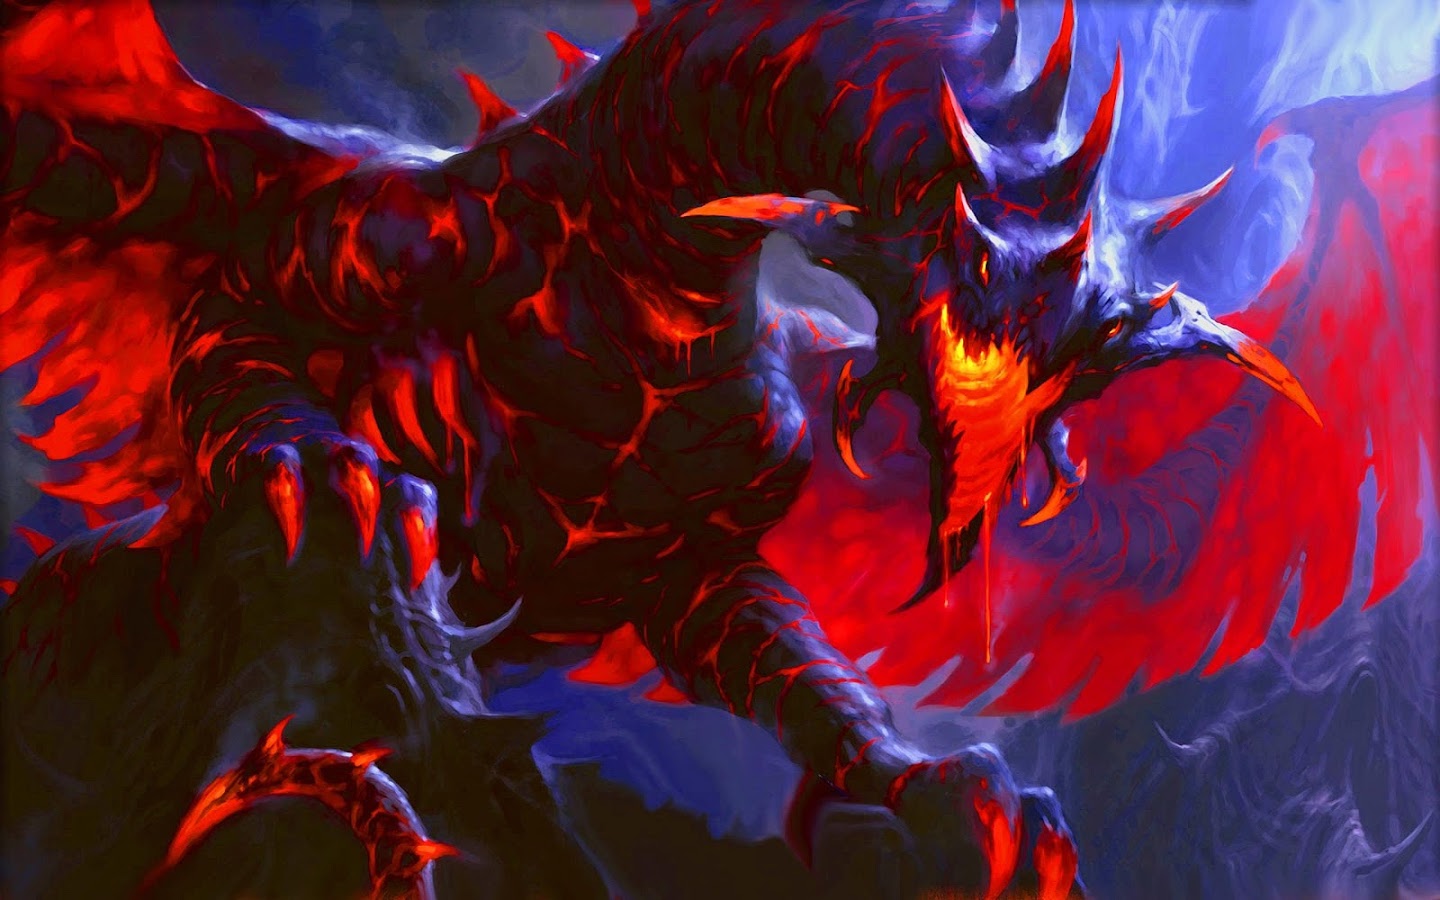 Fire Dragon Live Wallpaper - Android Apps on Google Play